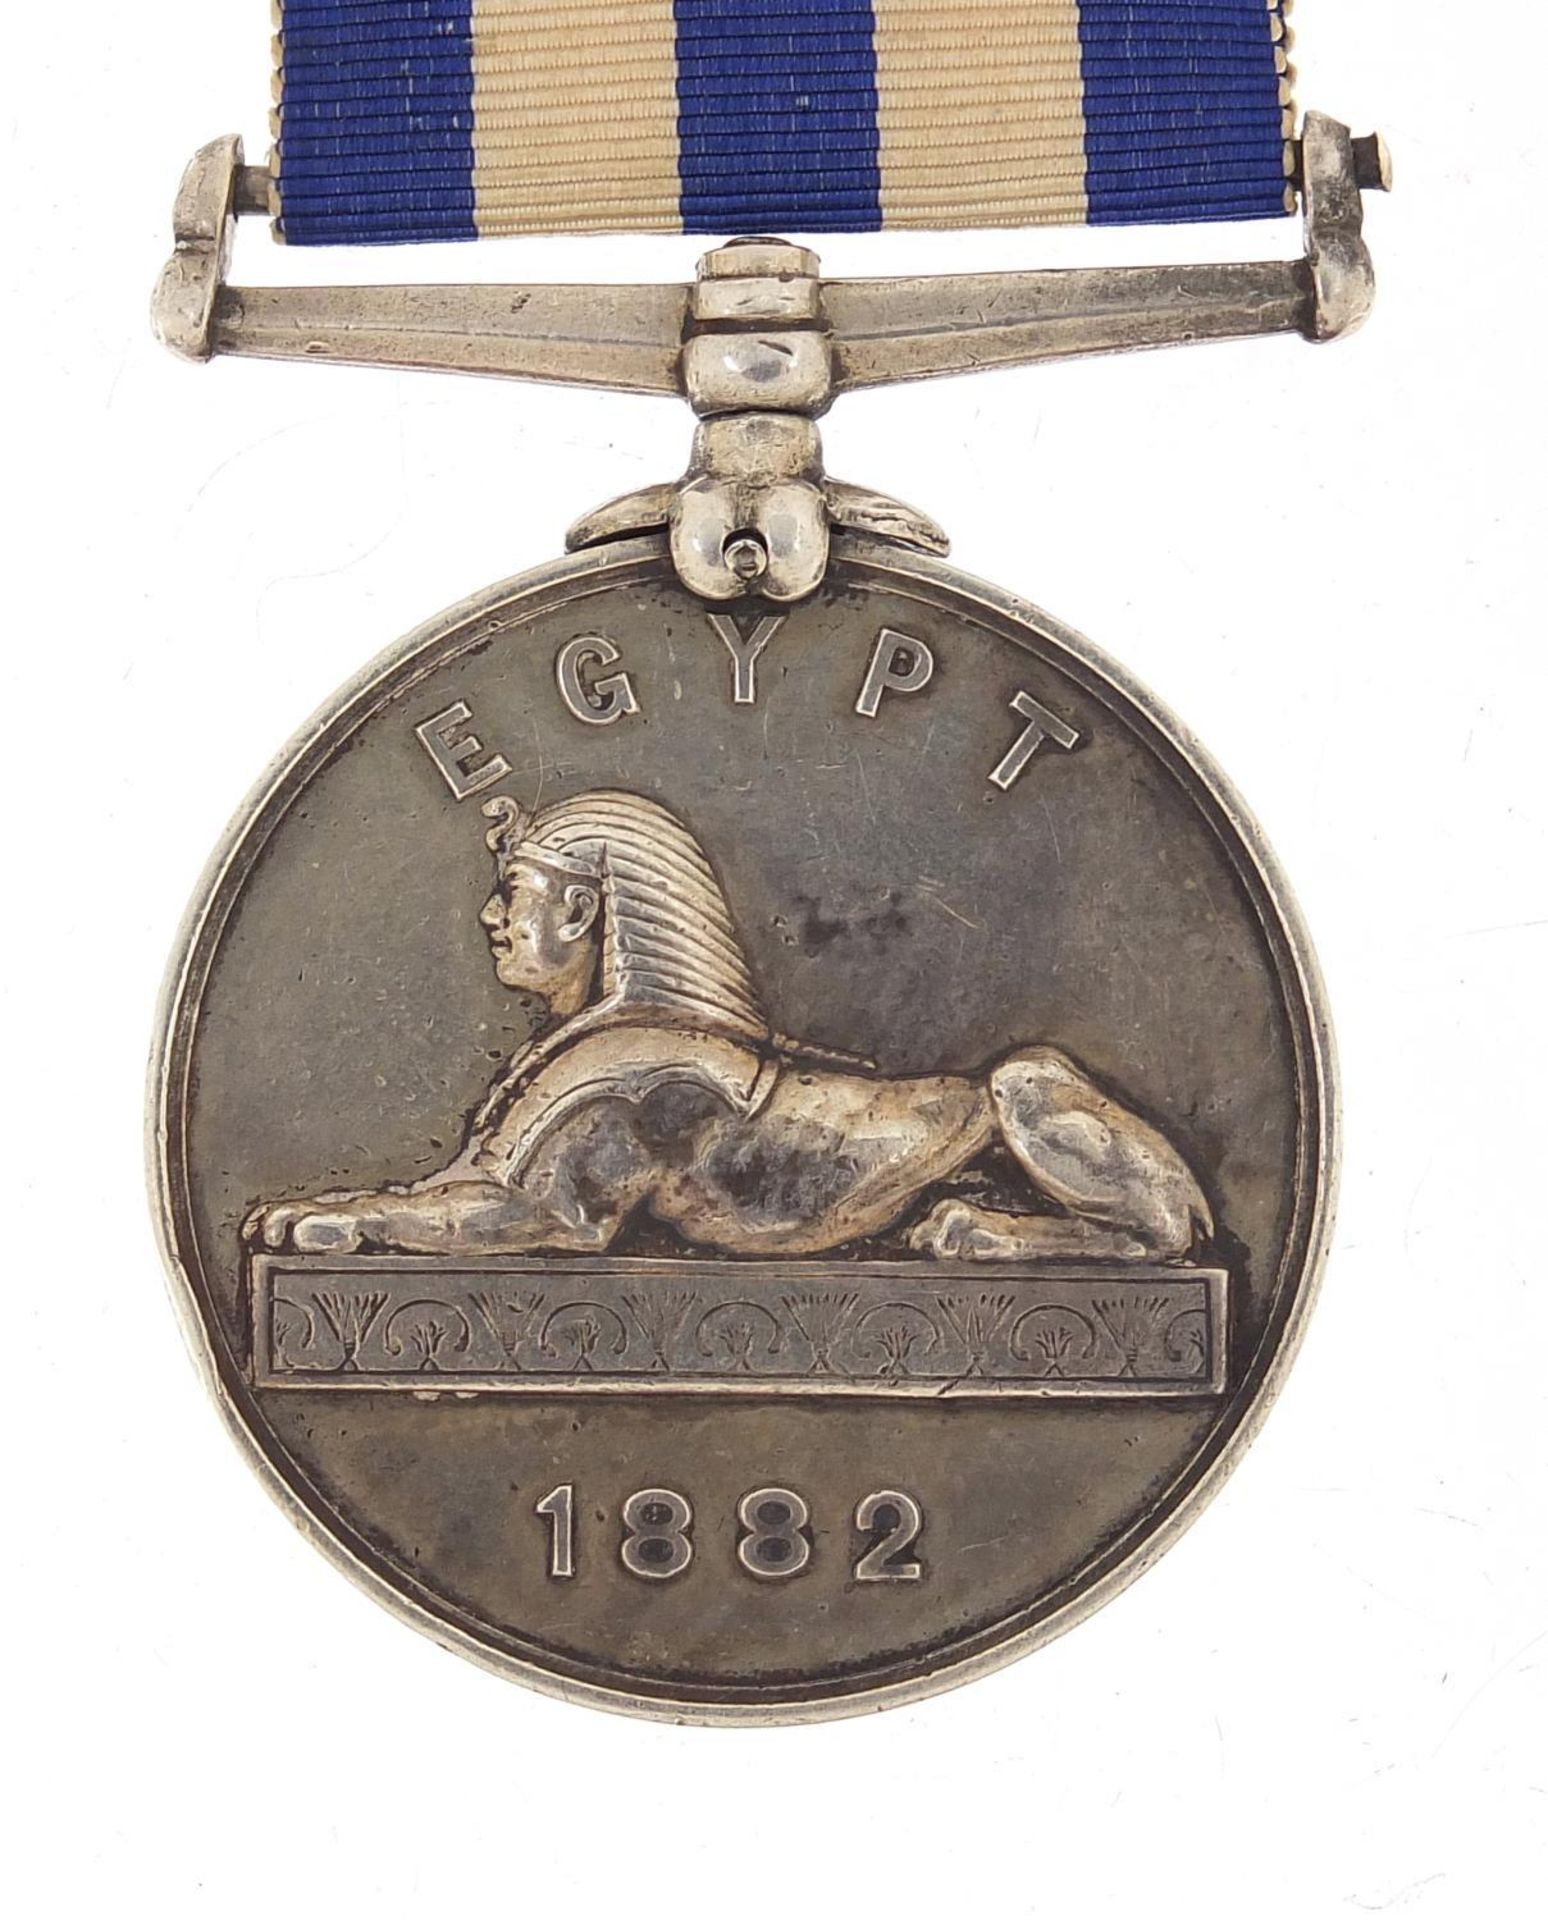 Victorian British military 1882 Egypt medal awarded to 2636.PTER.HOPWOOD.2/DERBY.R. - Image 4 of 4